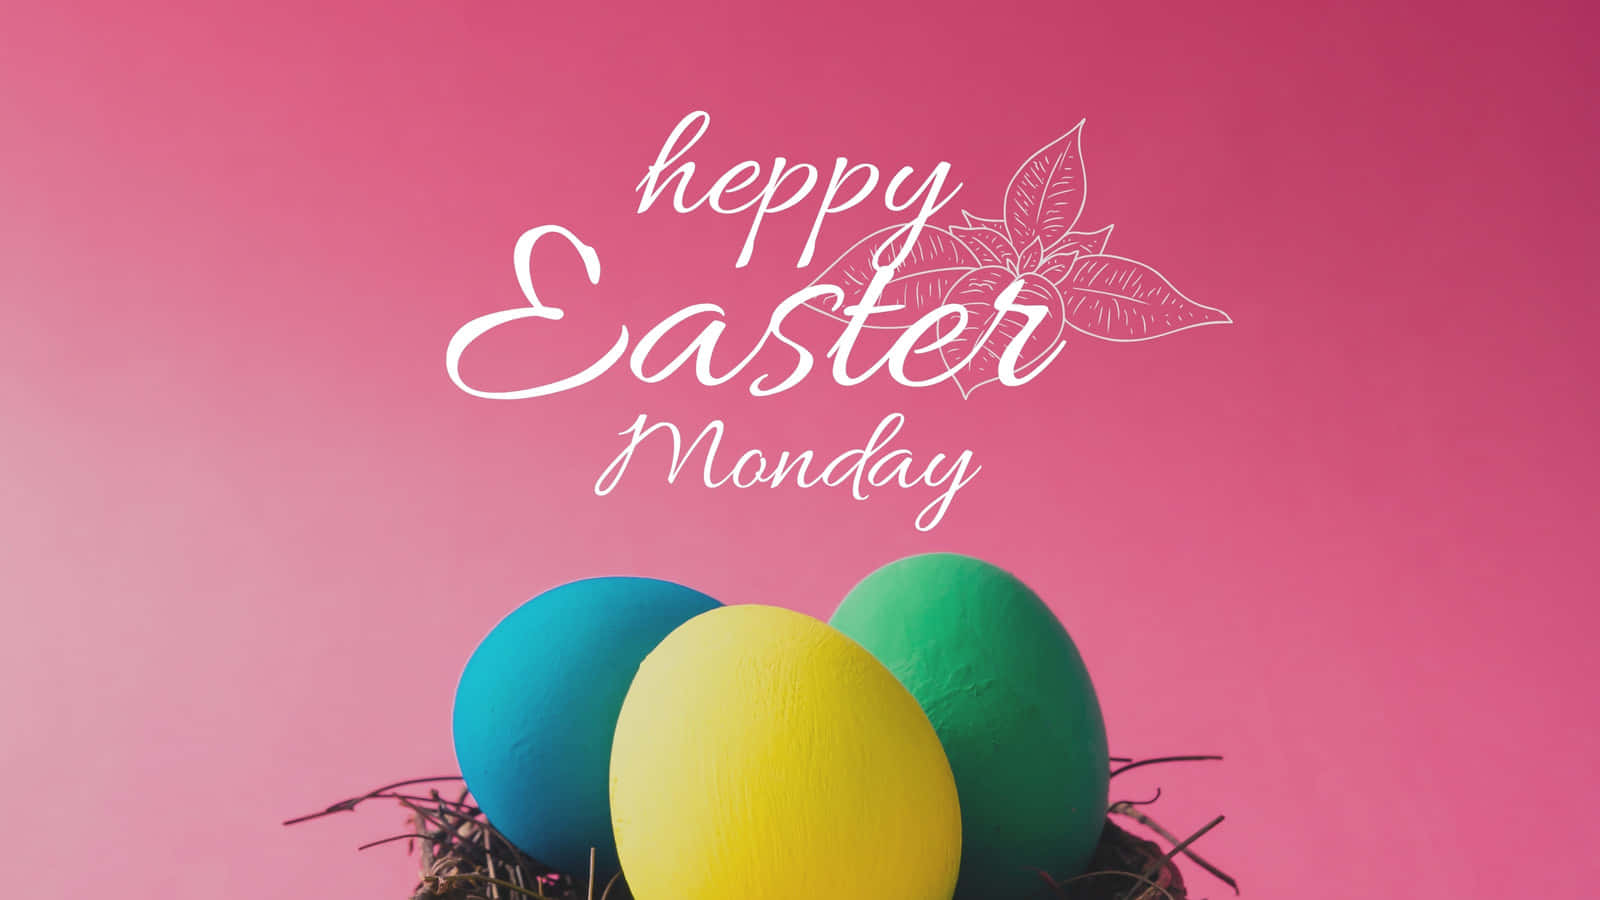 Download Happy Easter Monday With Colorful Eggs